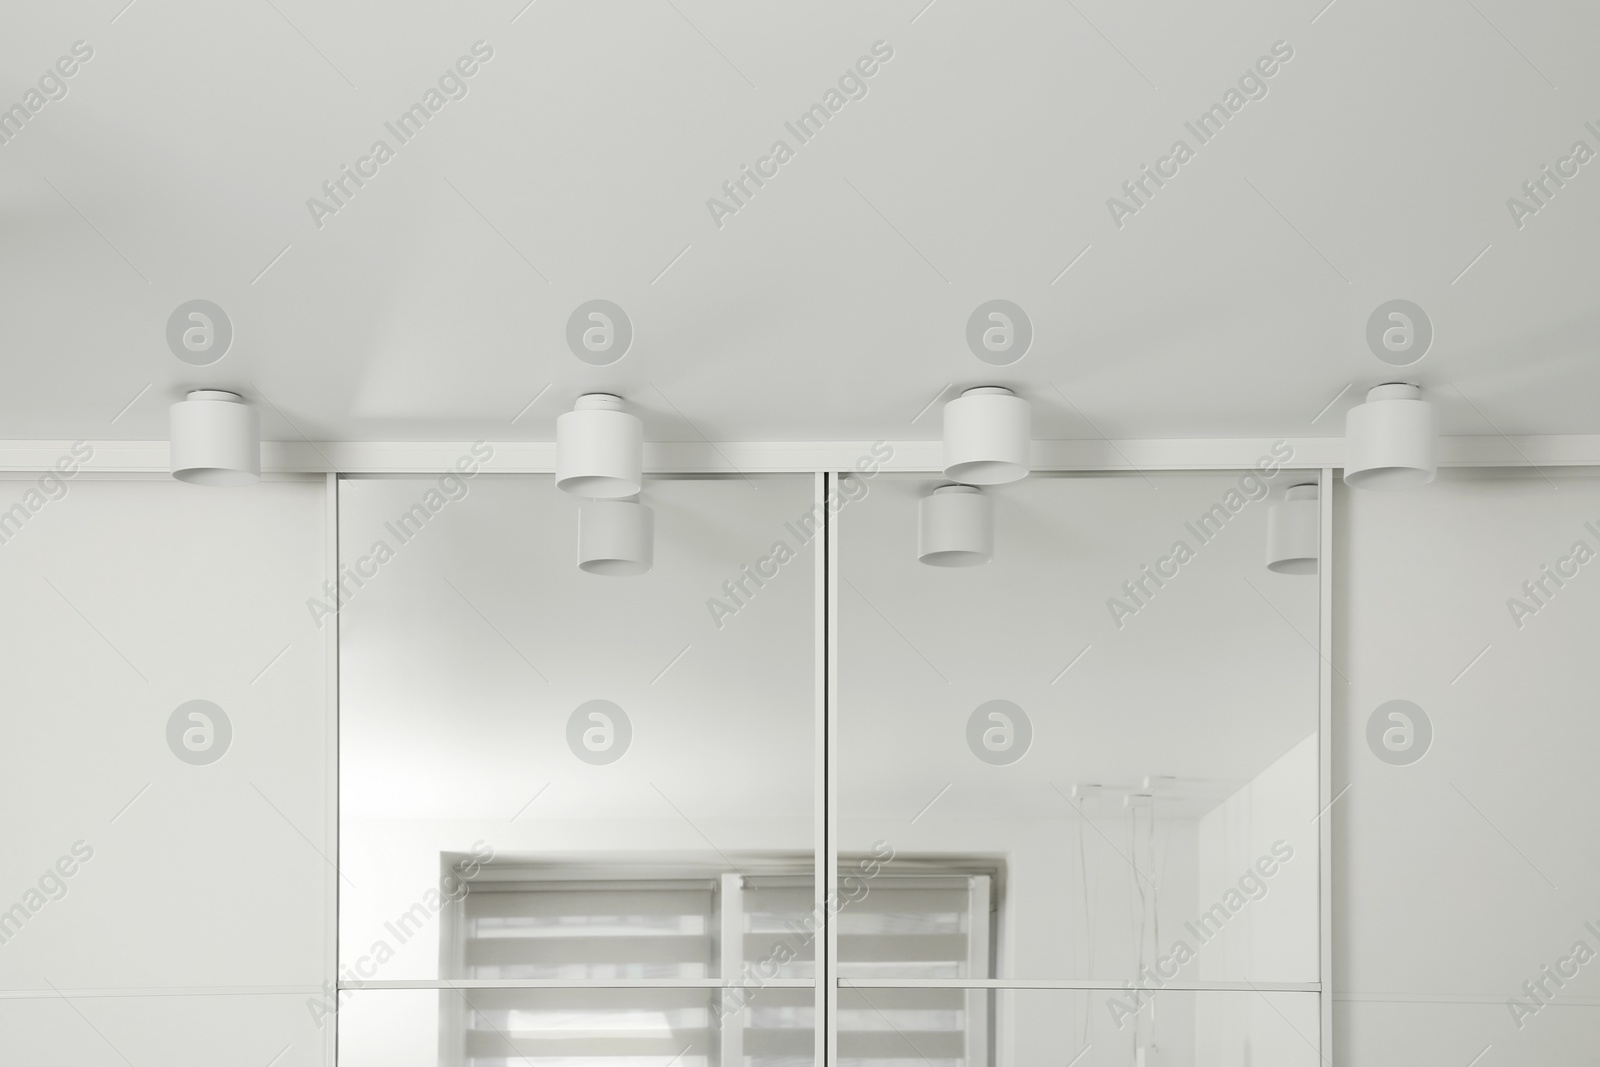 Photo of Stylish lamps near mirror on white ceiling